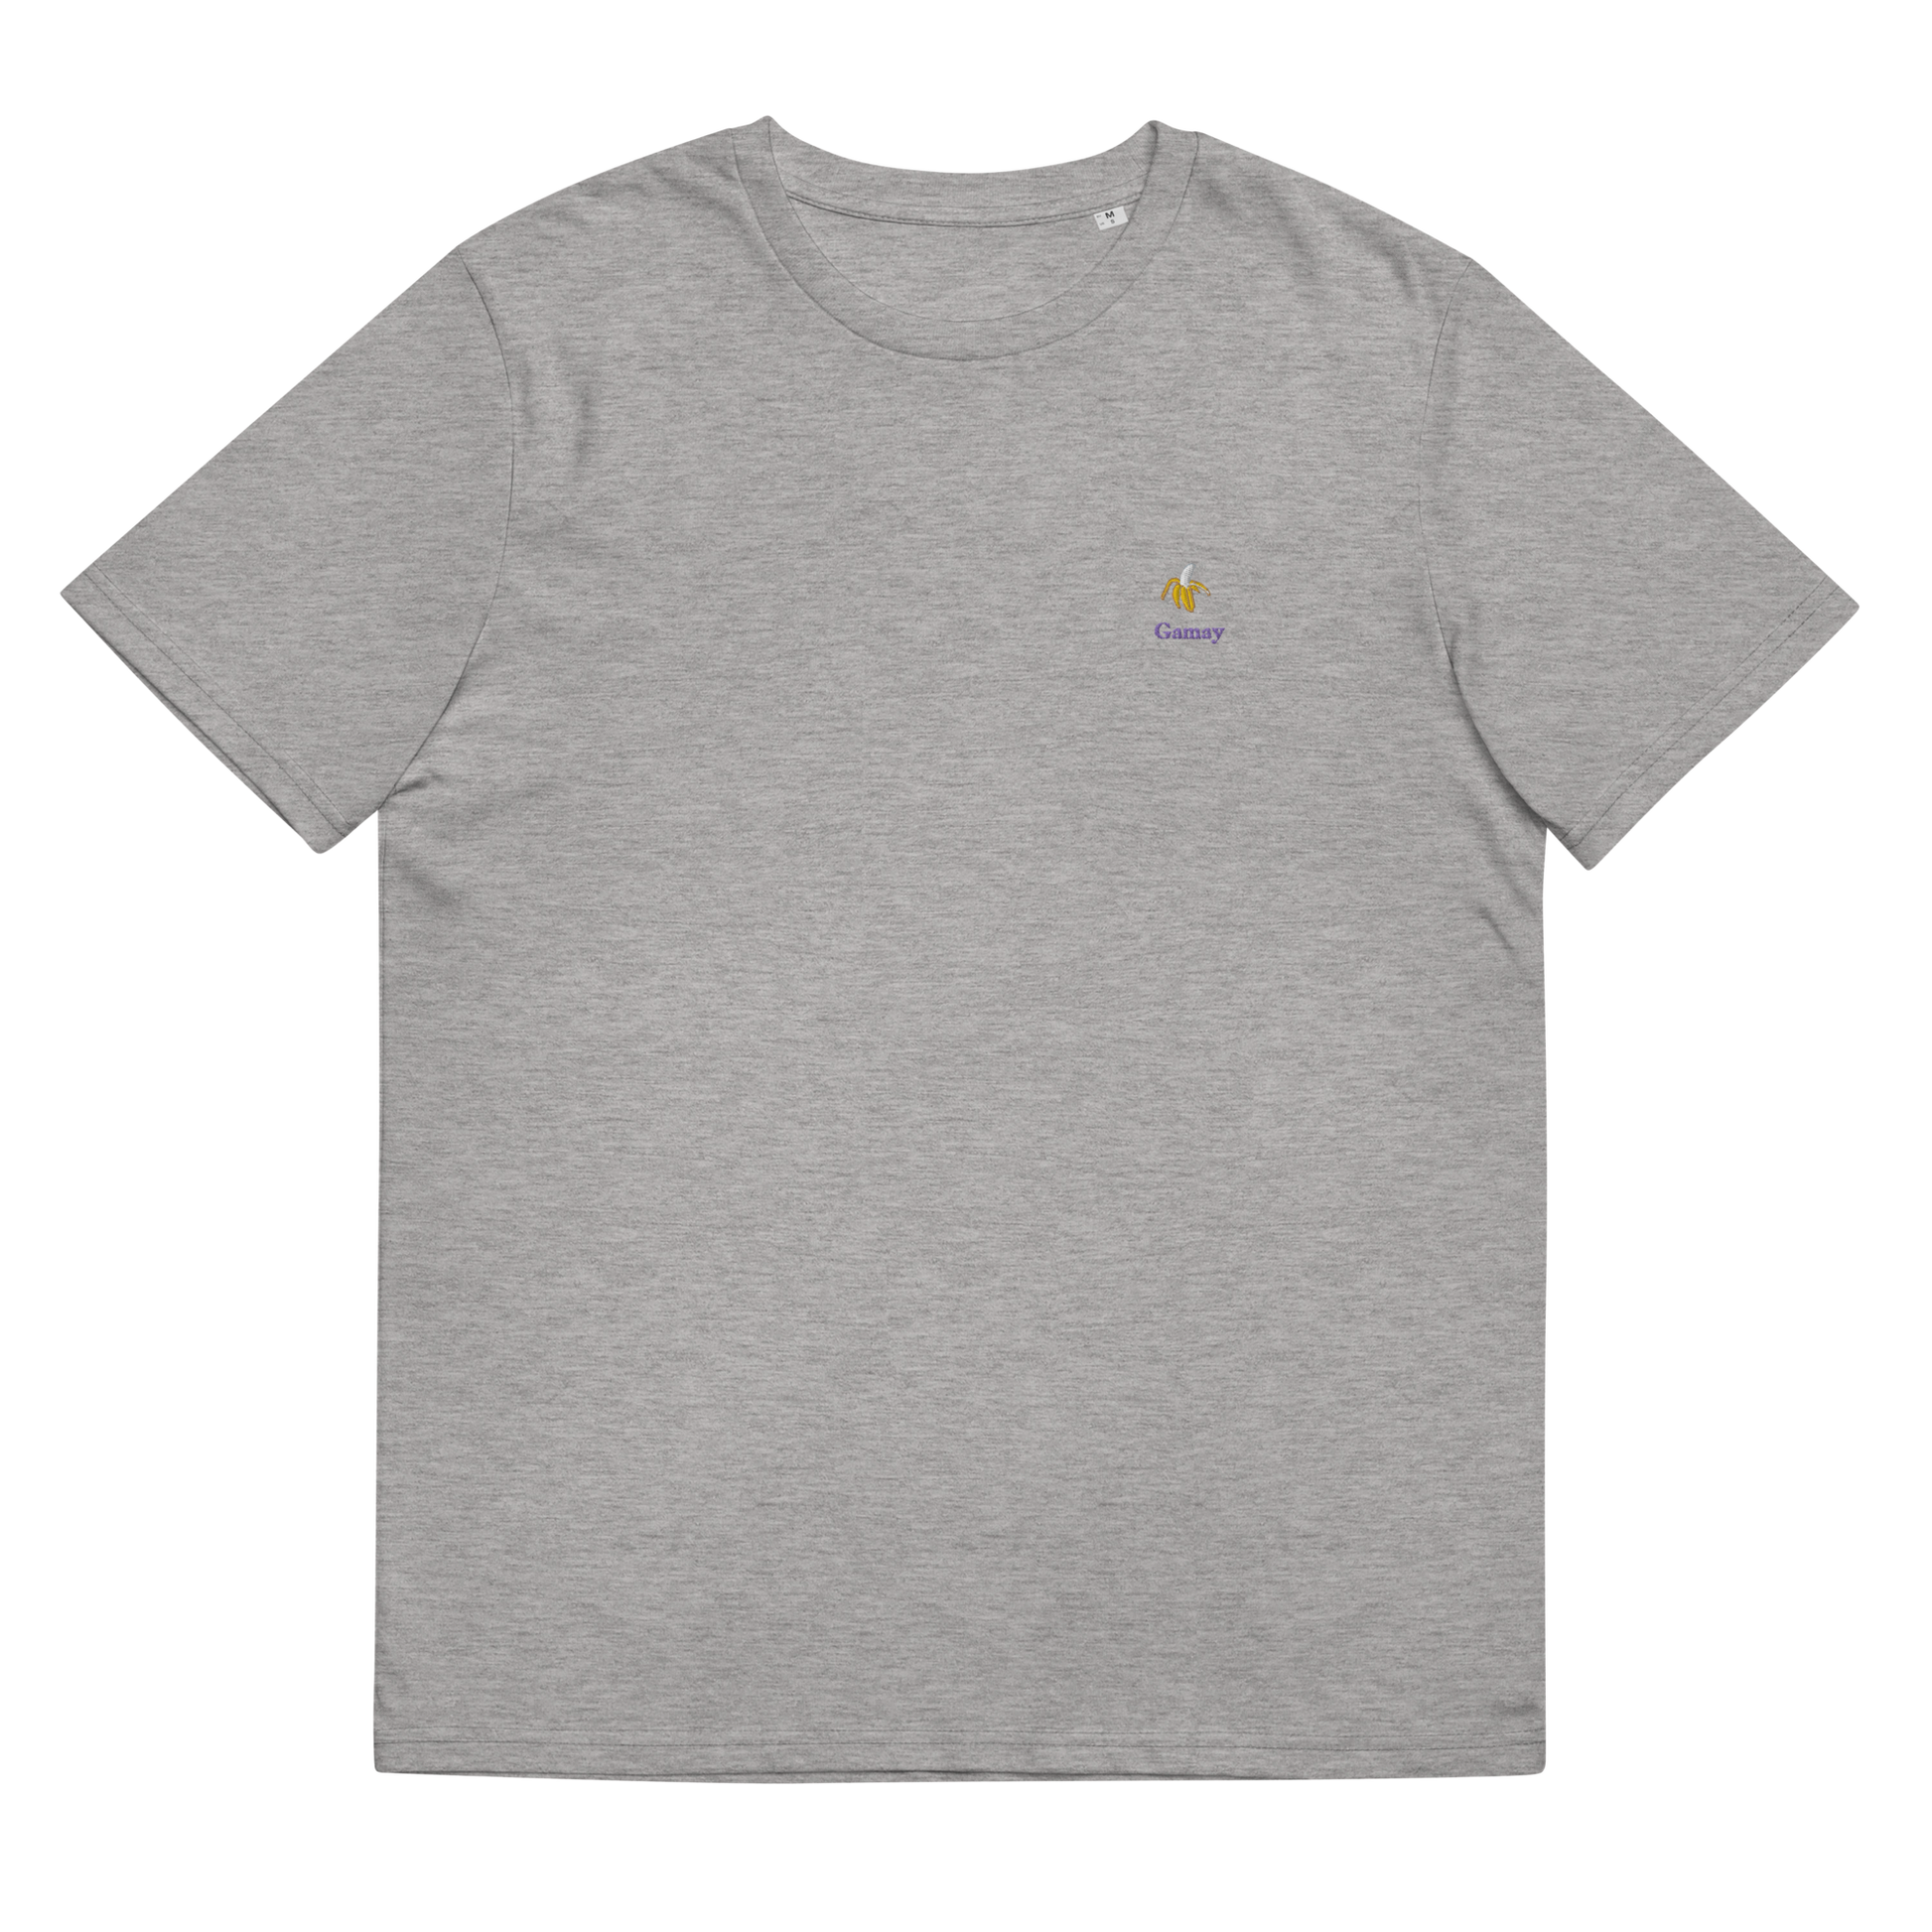 Gamay grey embroidered t-shirt